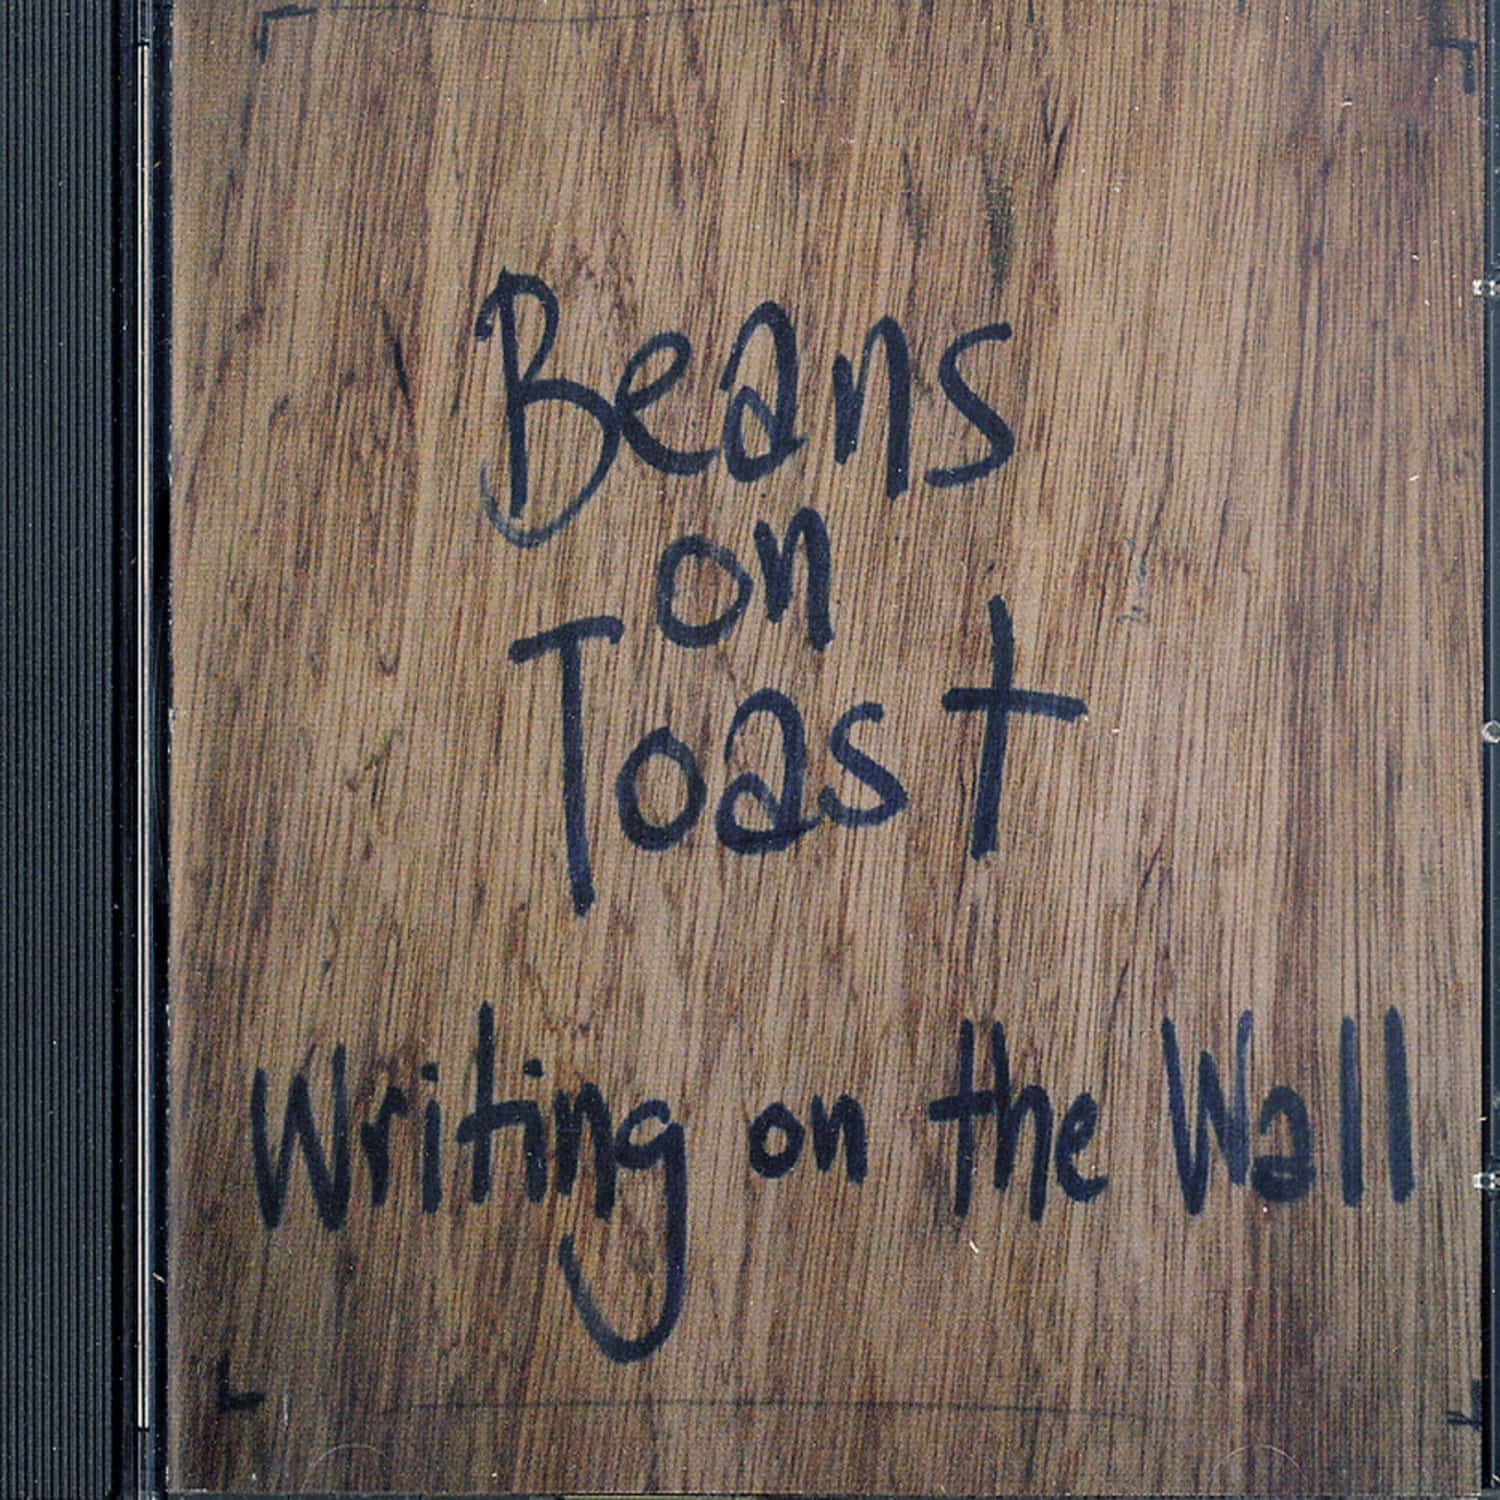 Beans On Toast - WRITING ON THE WALL 